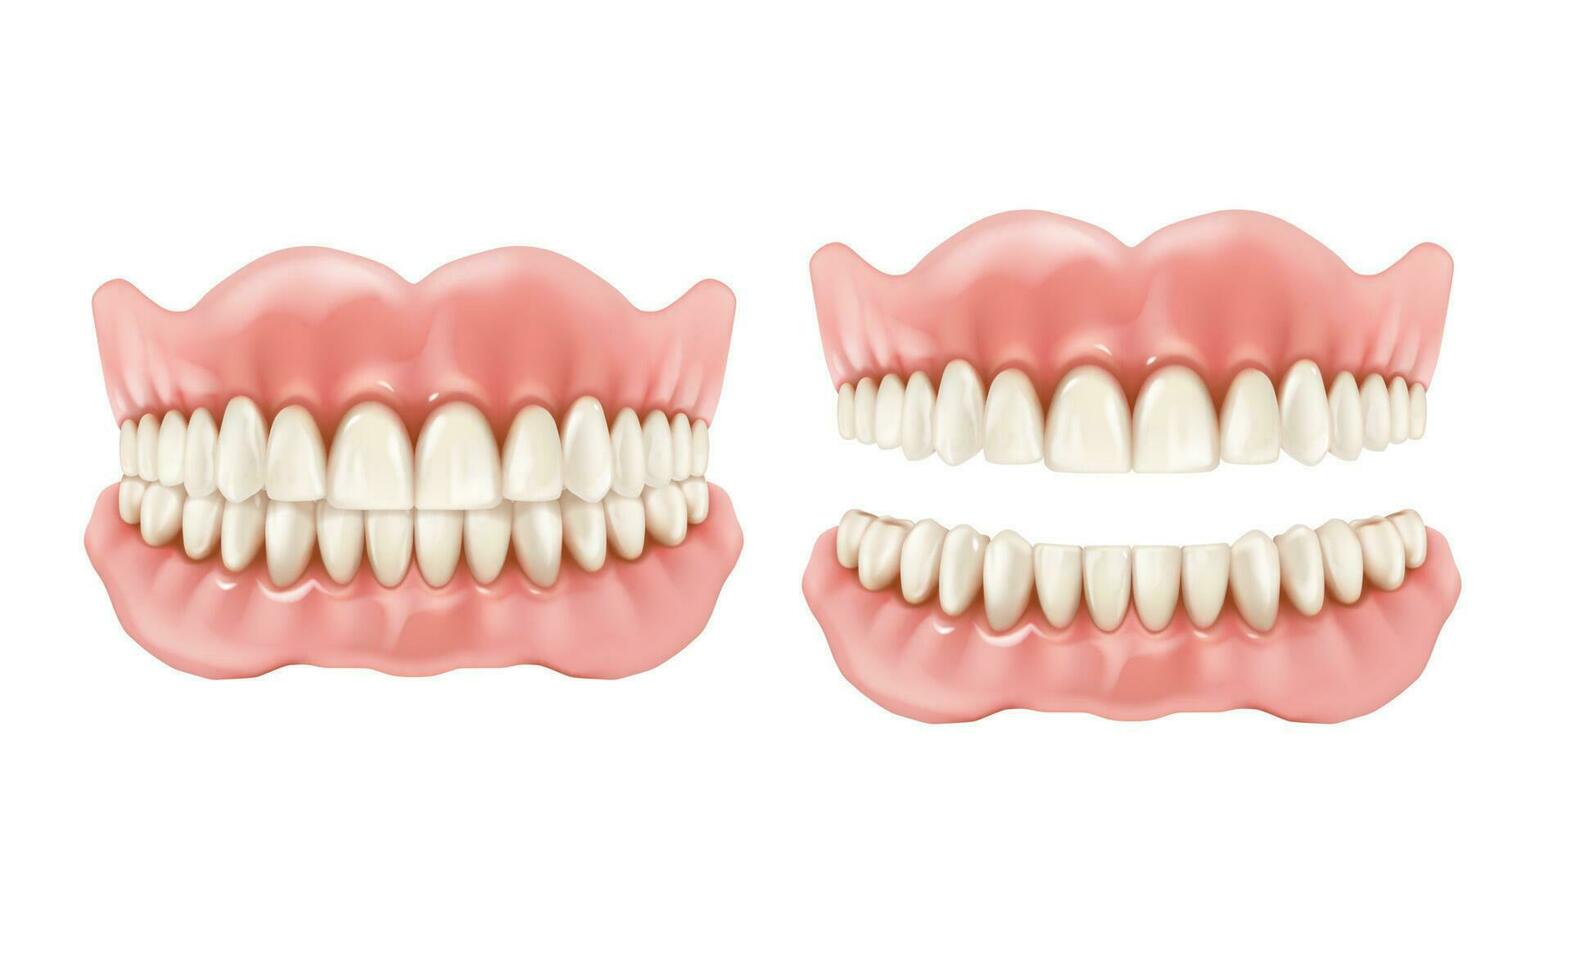 Denture, dental teeth and jaw realistic prosthesis vector